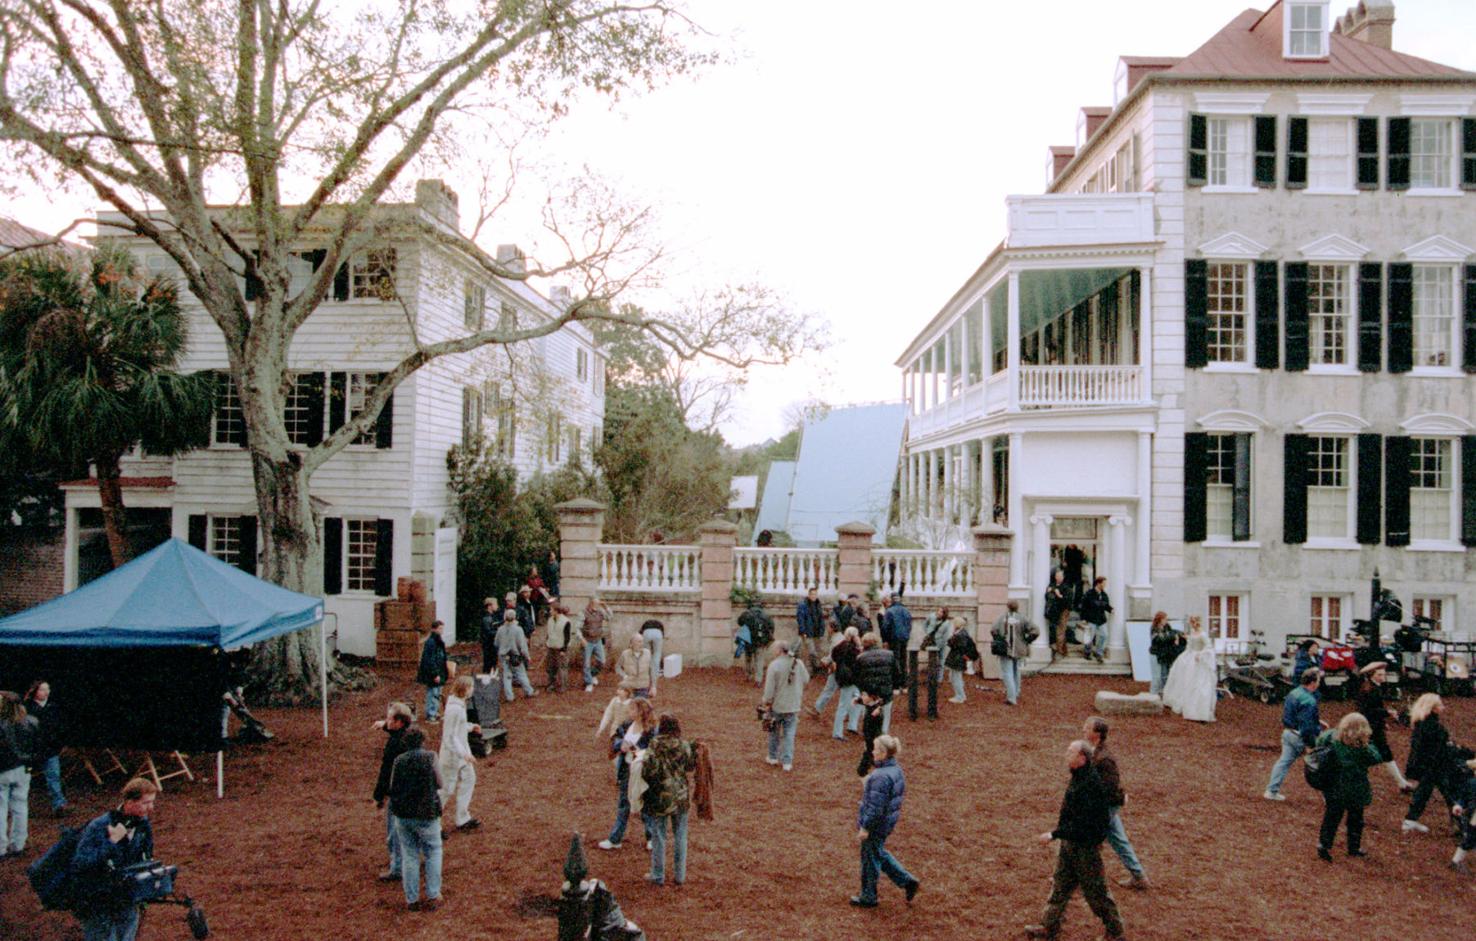 7 popular movies you might not realize were filmed in Charleston